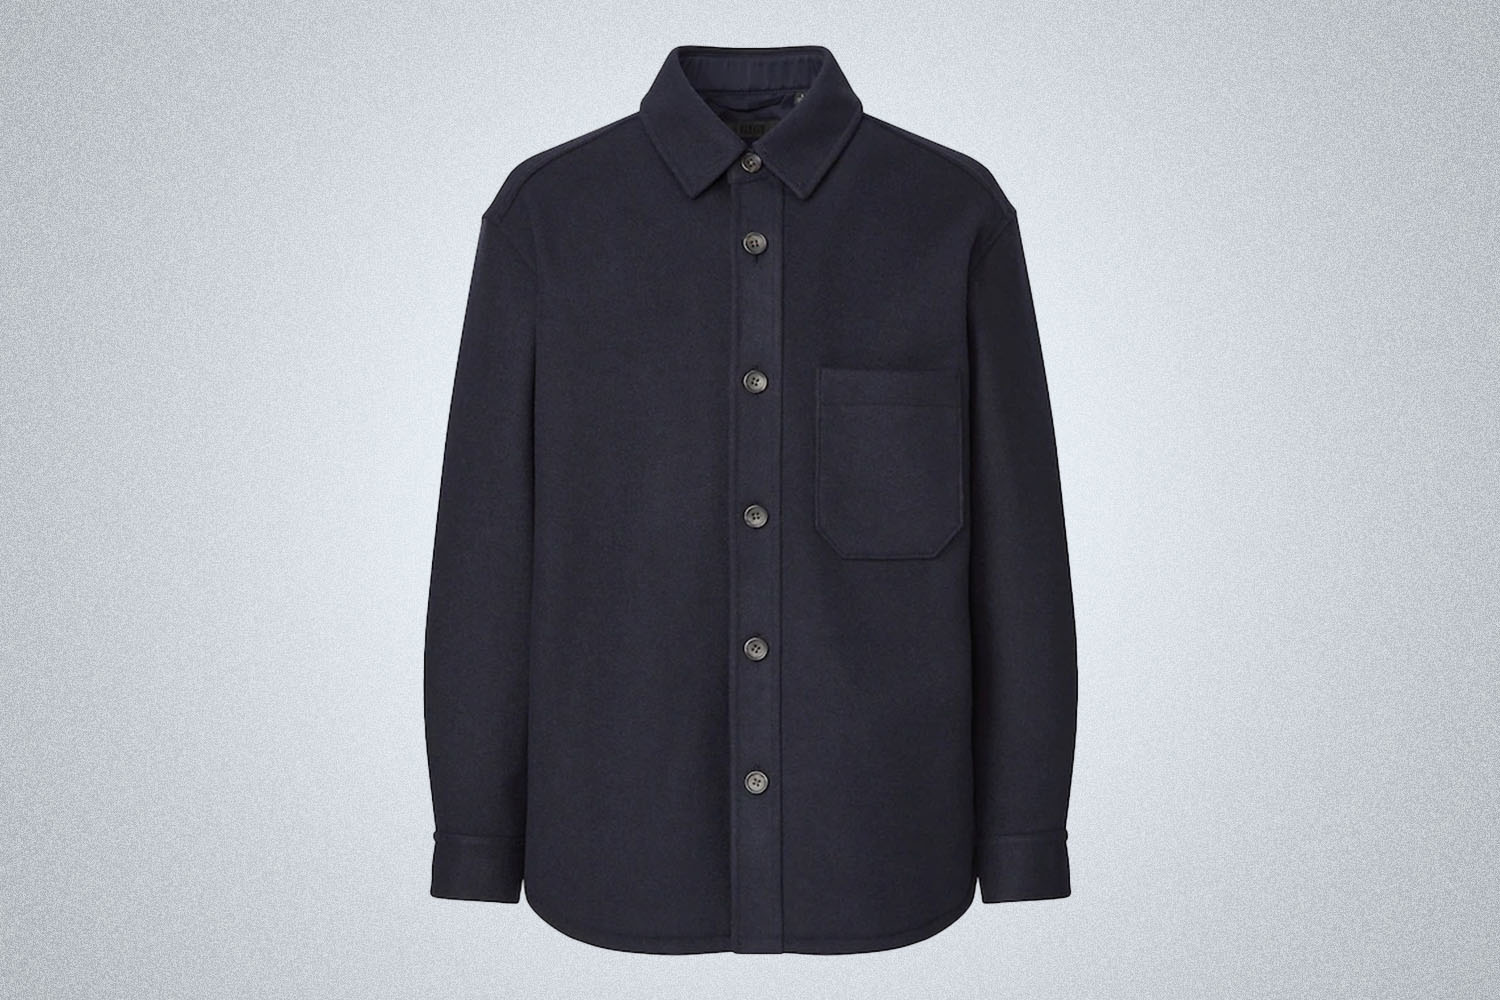 a navy blue buttoned overshirt from Uniqlo on a grey background